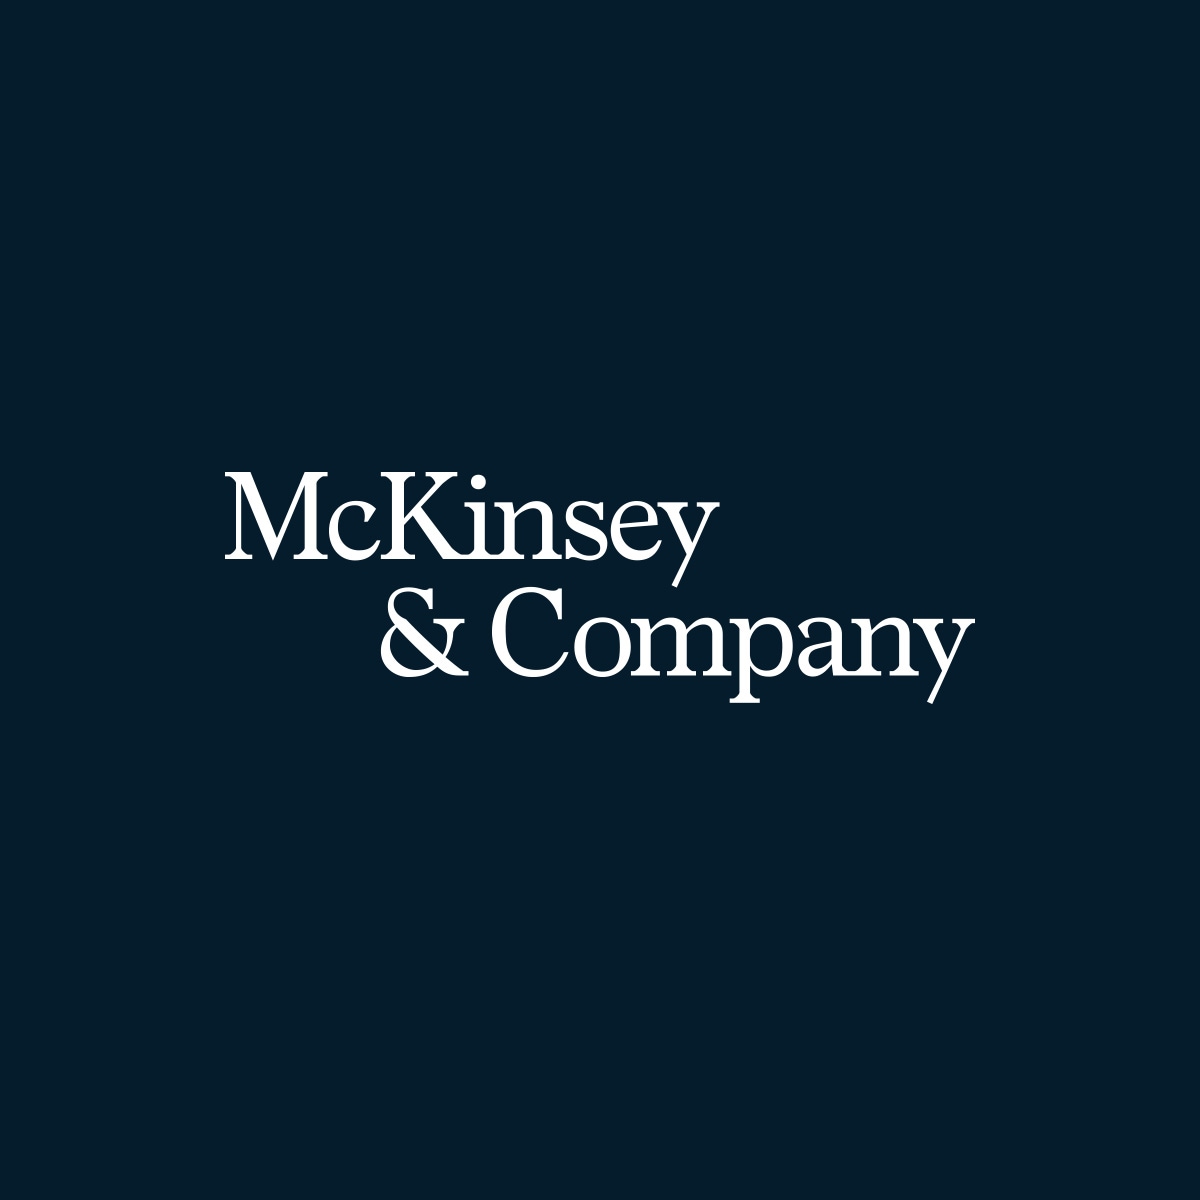 Global management consulting | McKinsey & Company